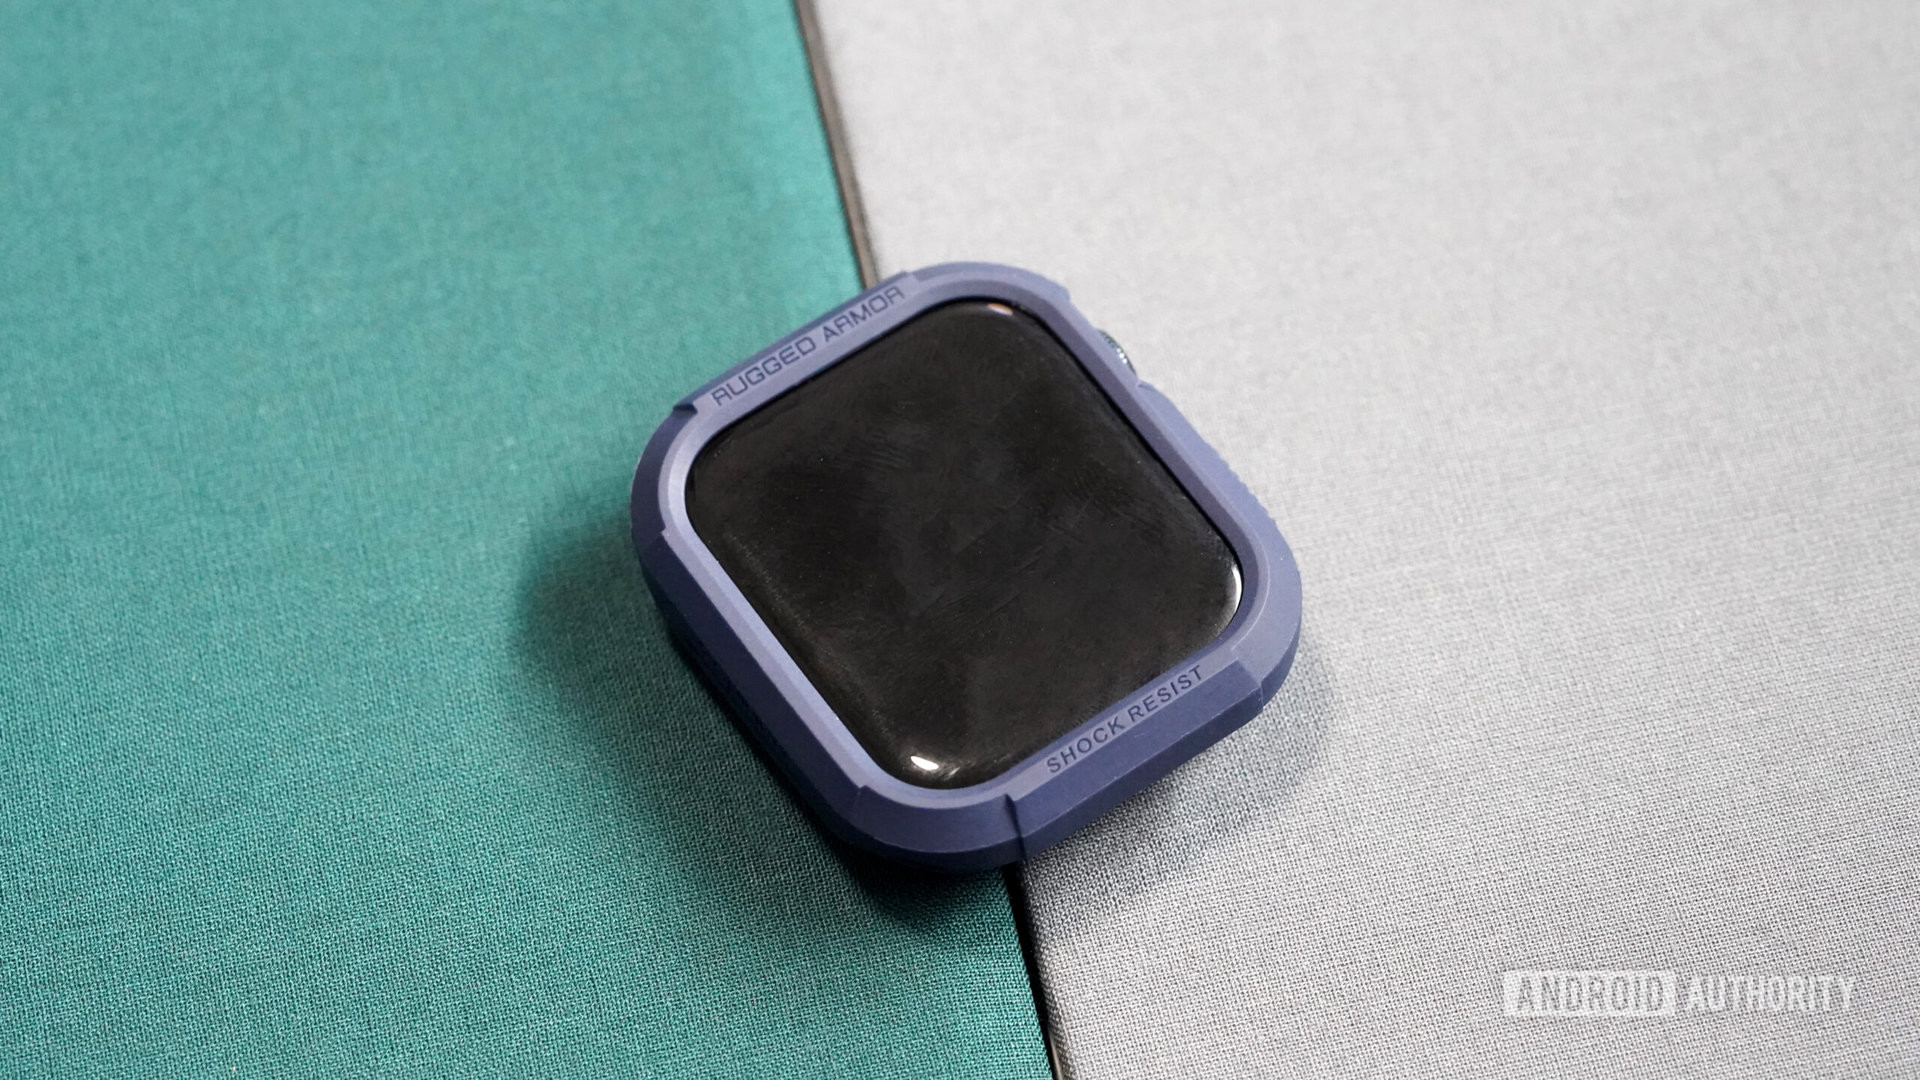 The Spigen Rugged Armor case is the best rugged Apple Watch case from a reliable brand.